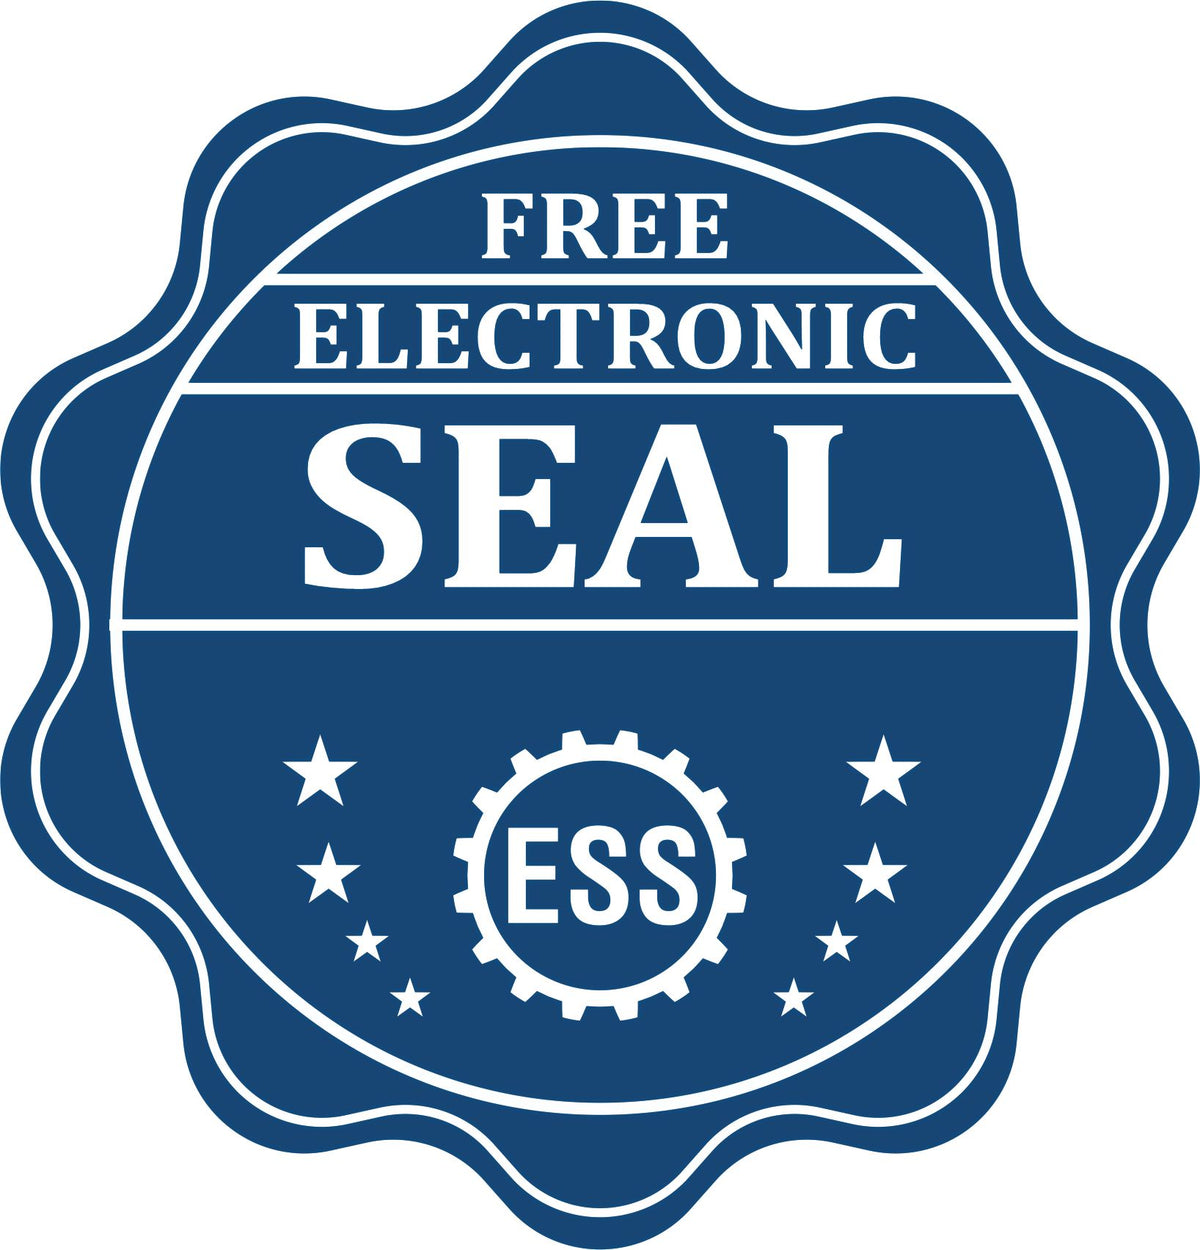 A badge showing a free electronic seal for the State of New Mexico Long Reach Architectural Embossing Seal with stars and the ESS gear on the emblem.